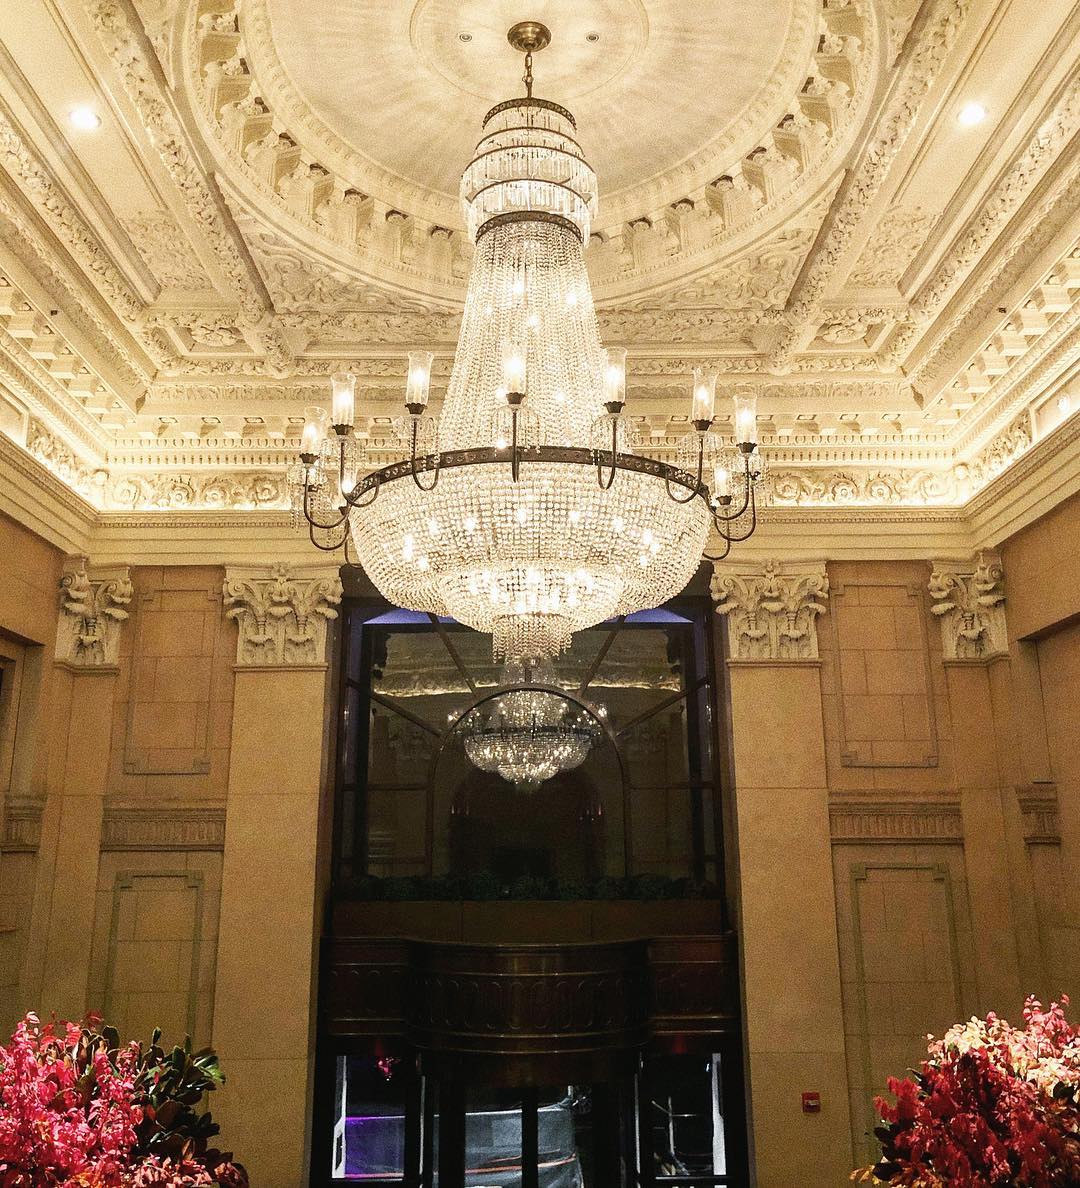 The grand chandelier at @ThePeninsulaNYC is a sight to see, and you can find it right in our lobby. Gorgeous photograph taken by @kristiedash. #penmoments